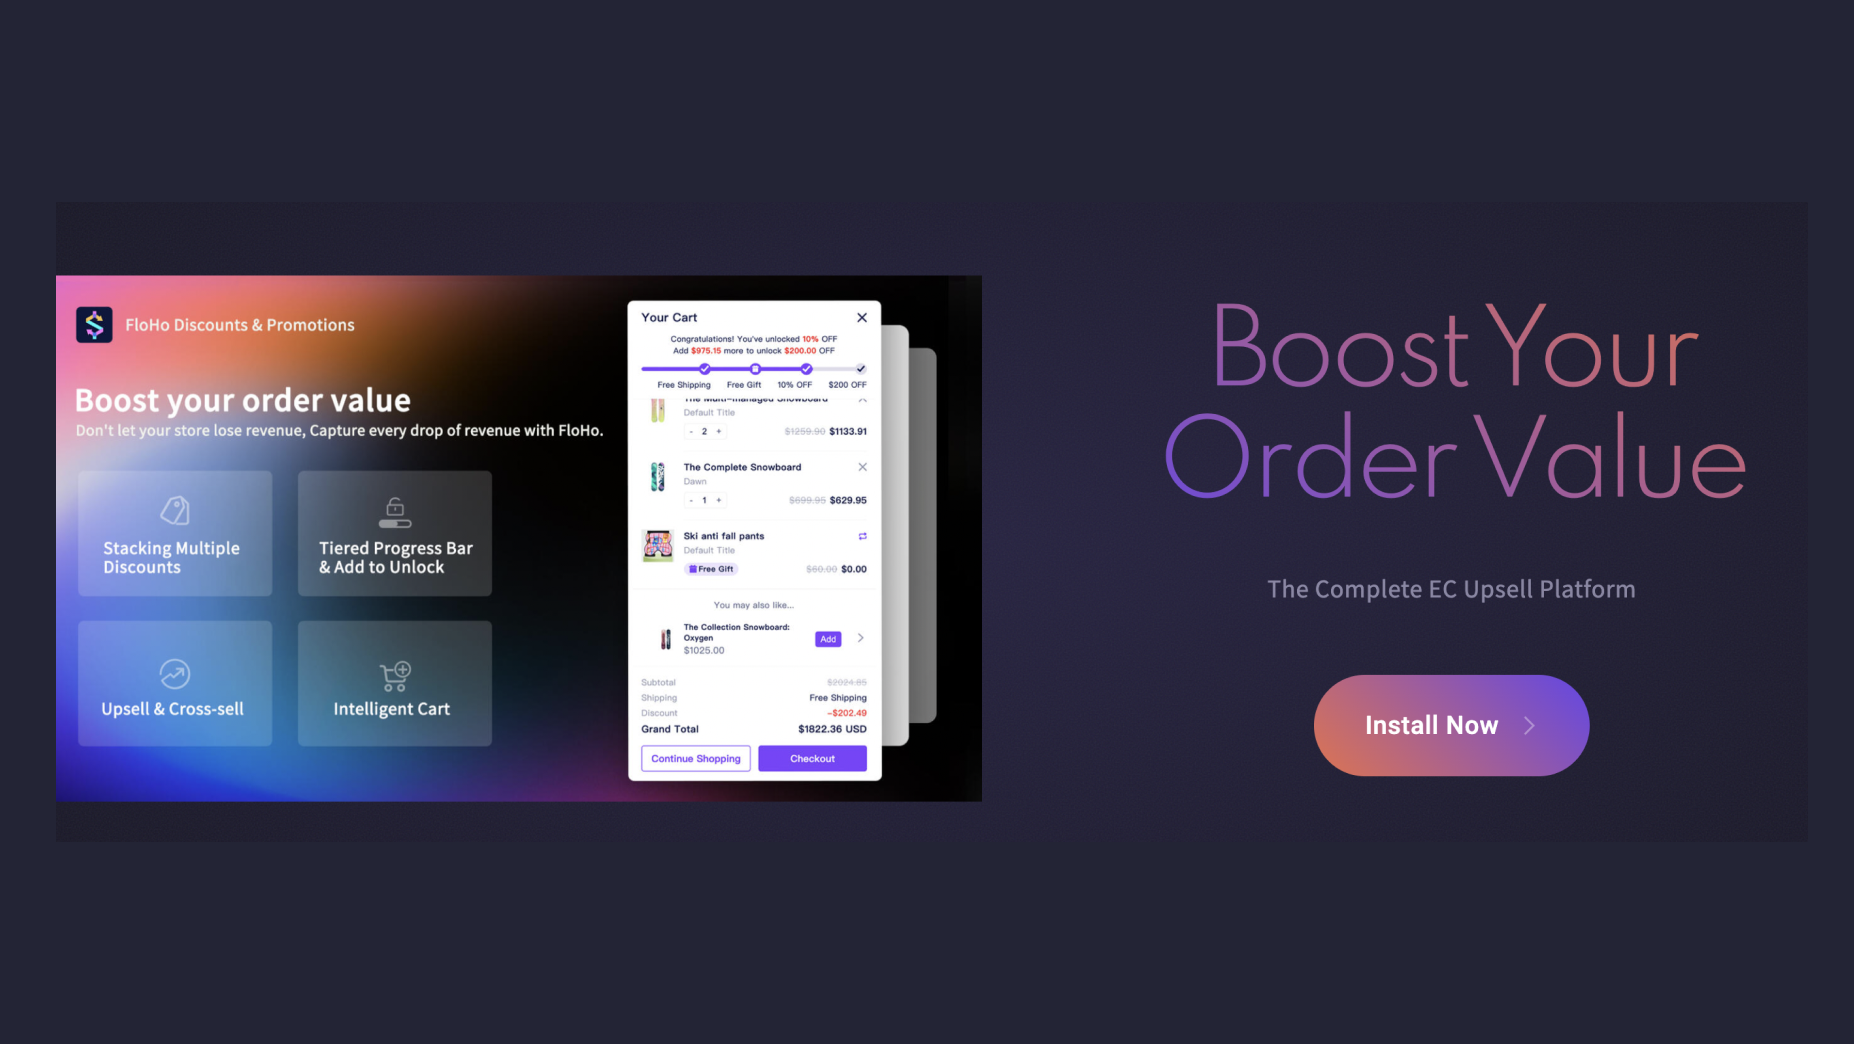 Screenshot of complete EC upsell platform to boost order value on WooCommerce store